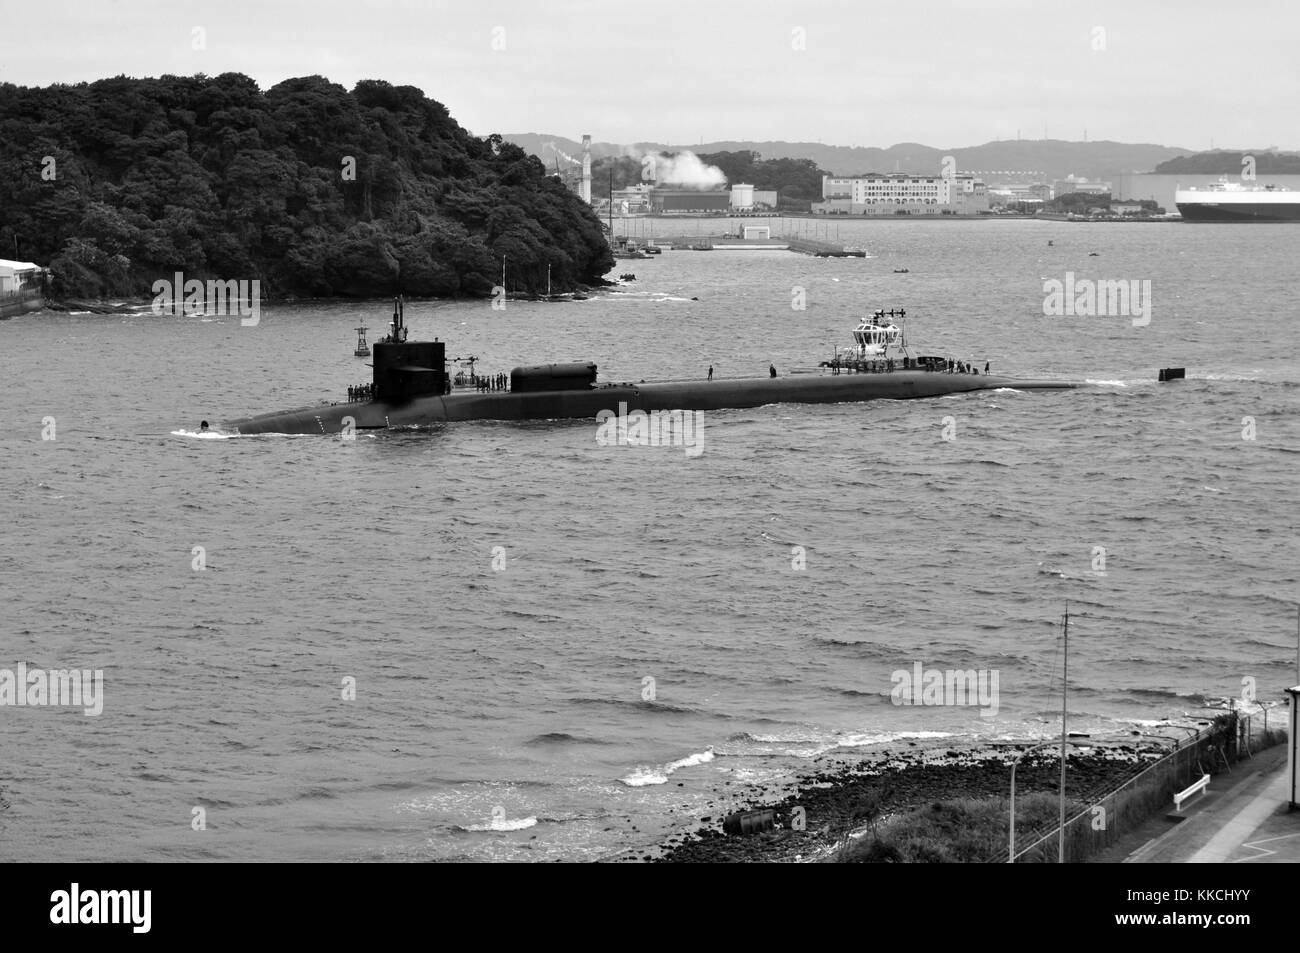 The Ohio-class guided-missile submarine USS Michigan SSGN 727 arrives at Fleet Activities Yokosuka as part of its deployment to the western Pacific, Yokosuka, Japan, 2012. Image courtesy Mass Communication Specialist 1st Class David Mercil/US Navy. Stock Photo